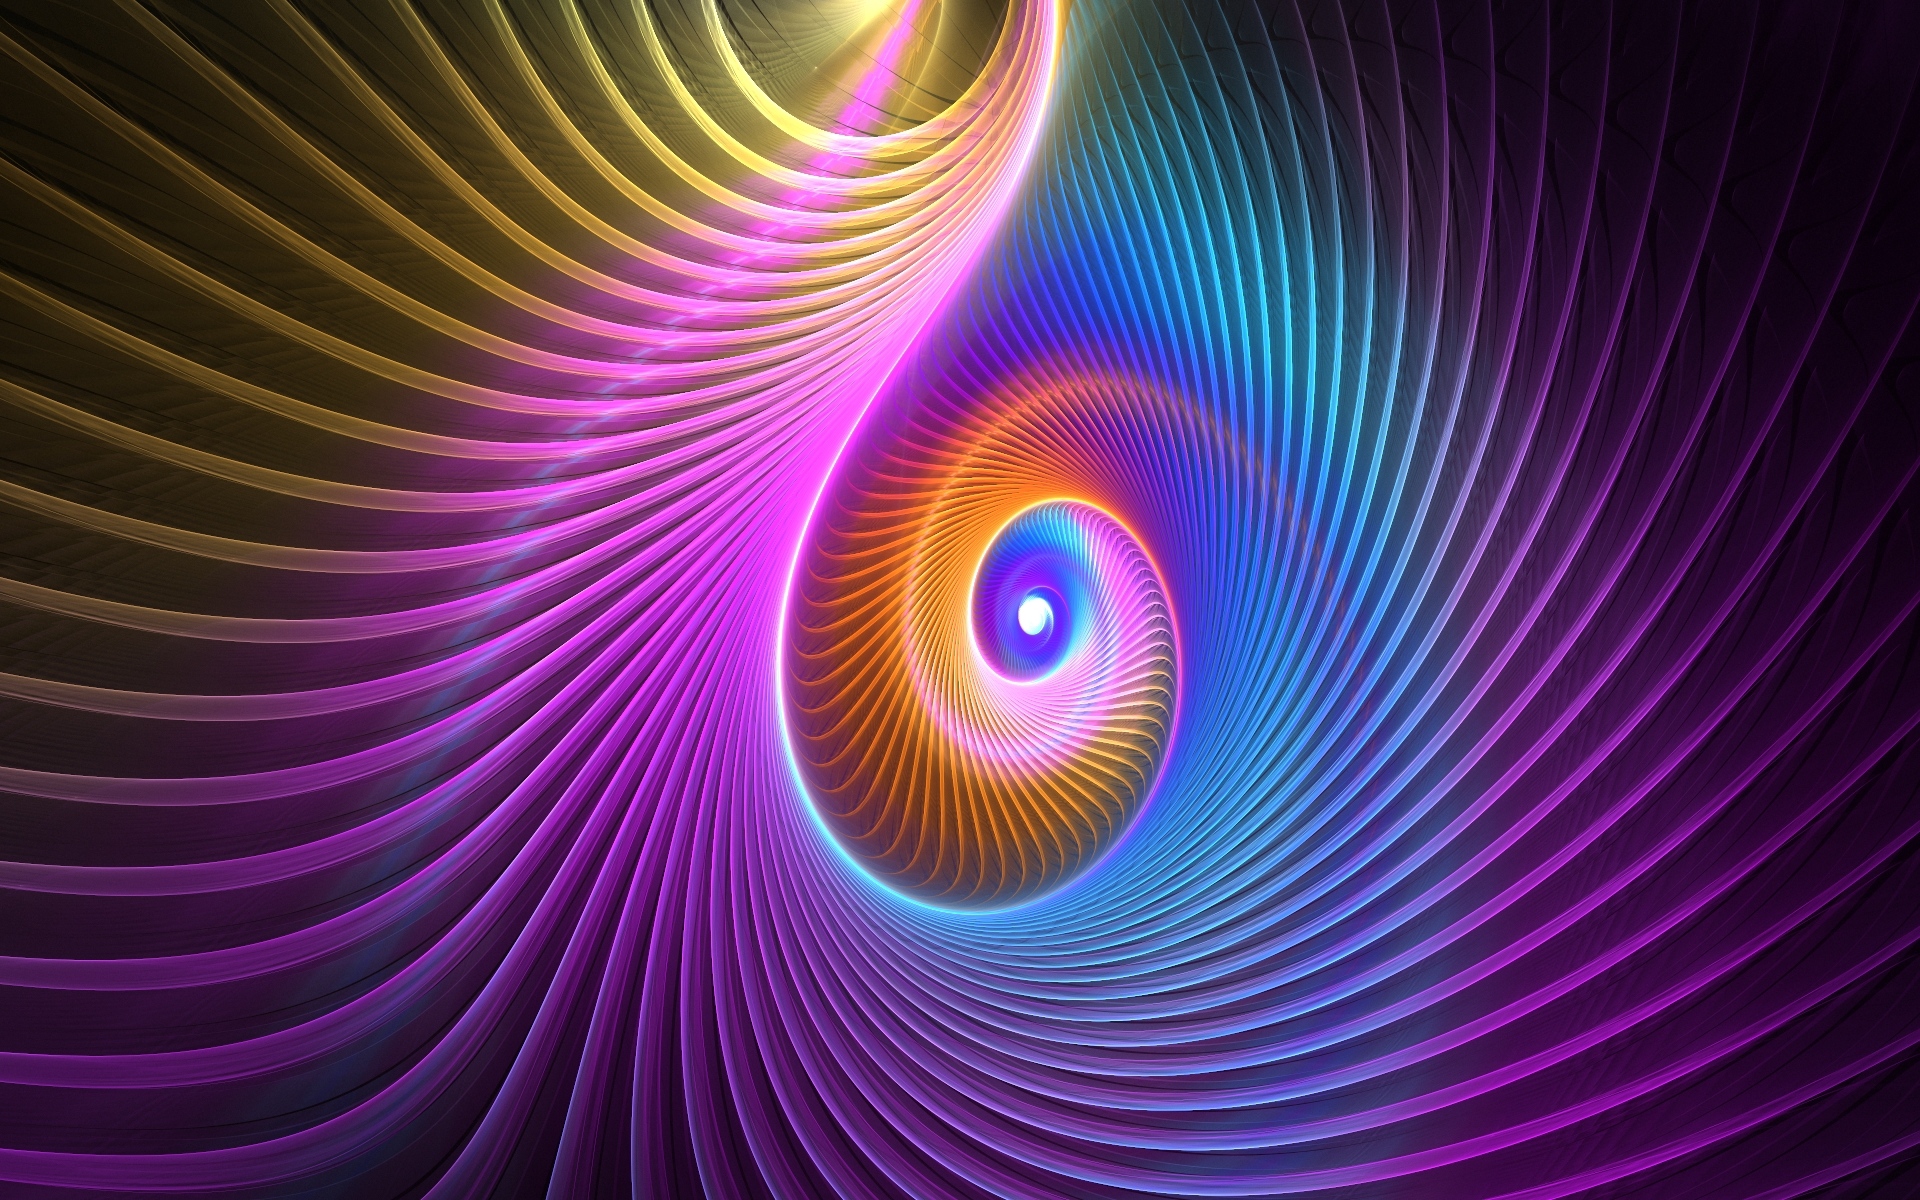 Download wallpaper 1920x1200 3d, abstract, fractal, bright hd background